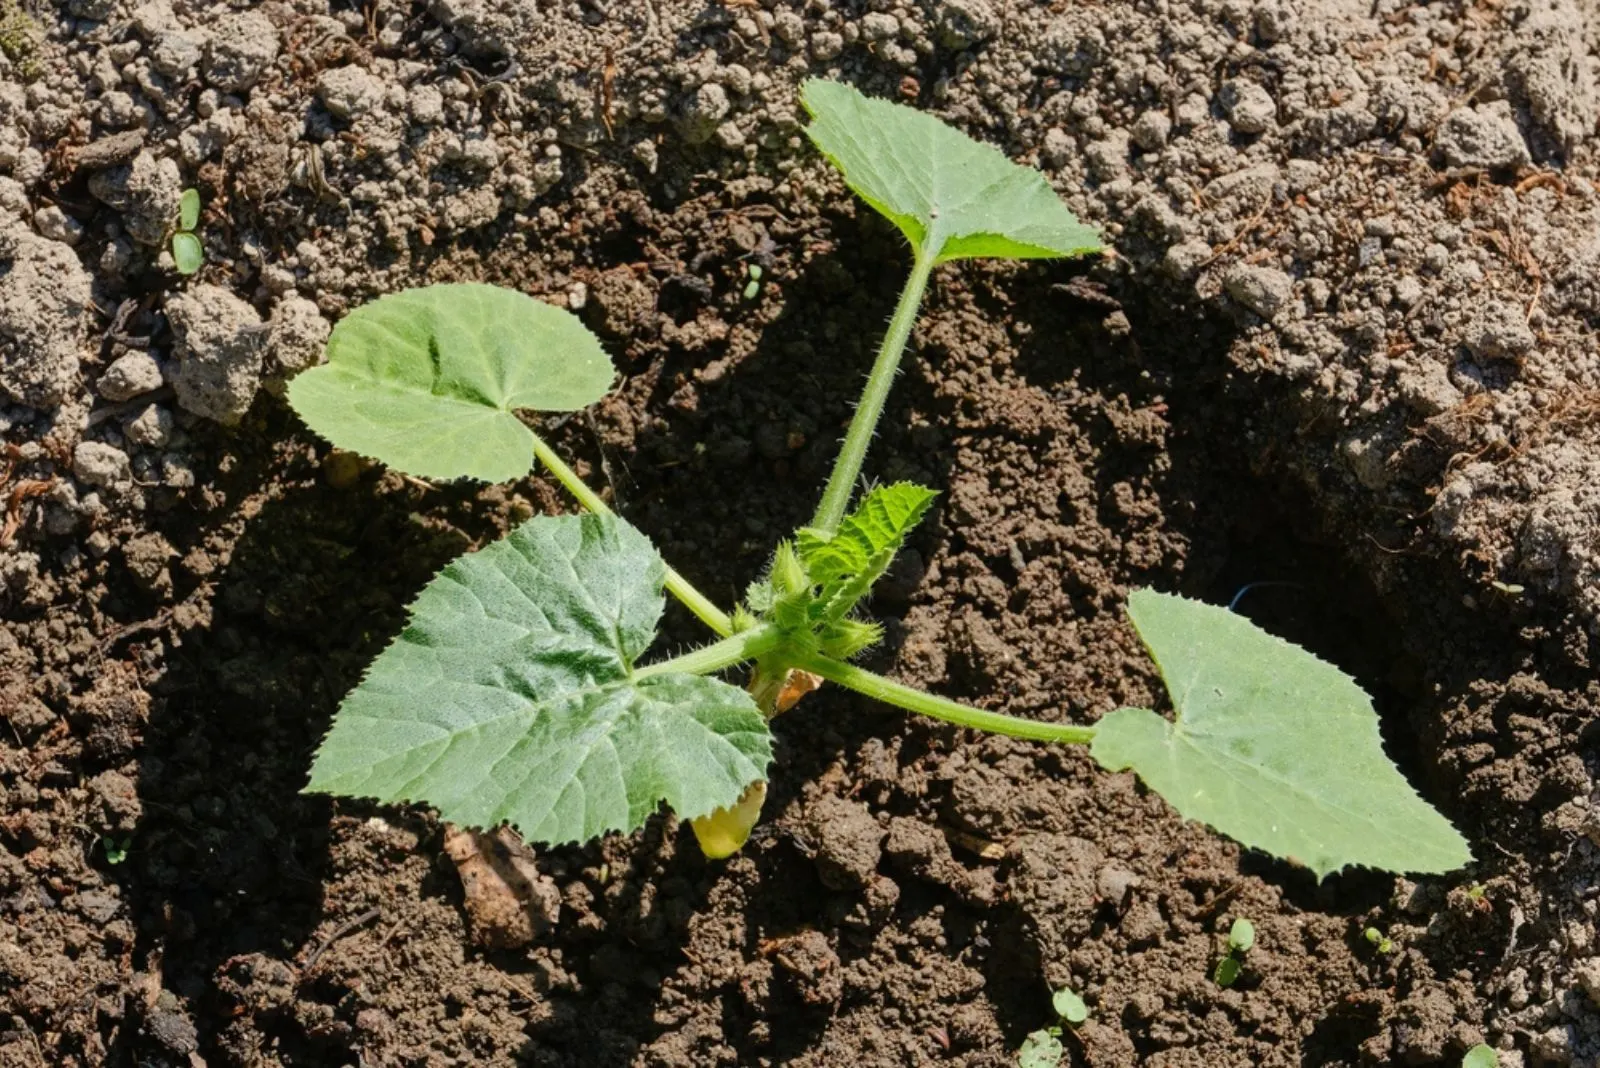 Young seedling of zucchini or courgette sprouts in the garden